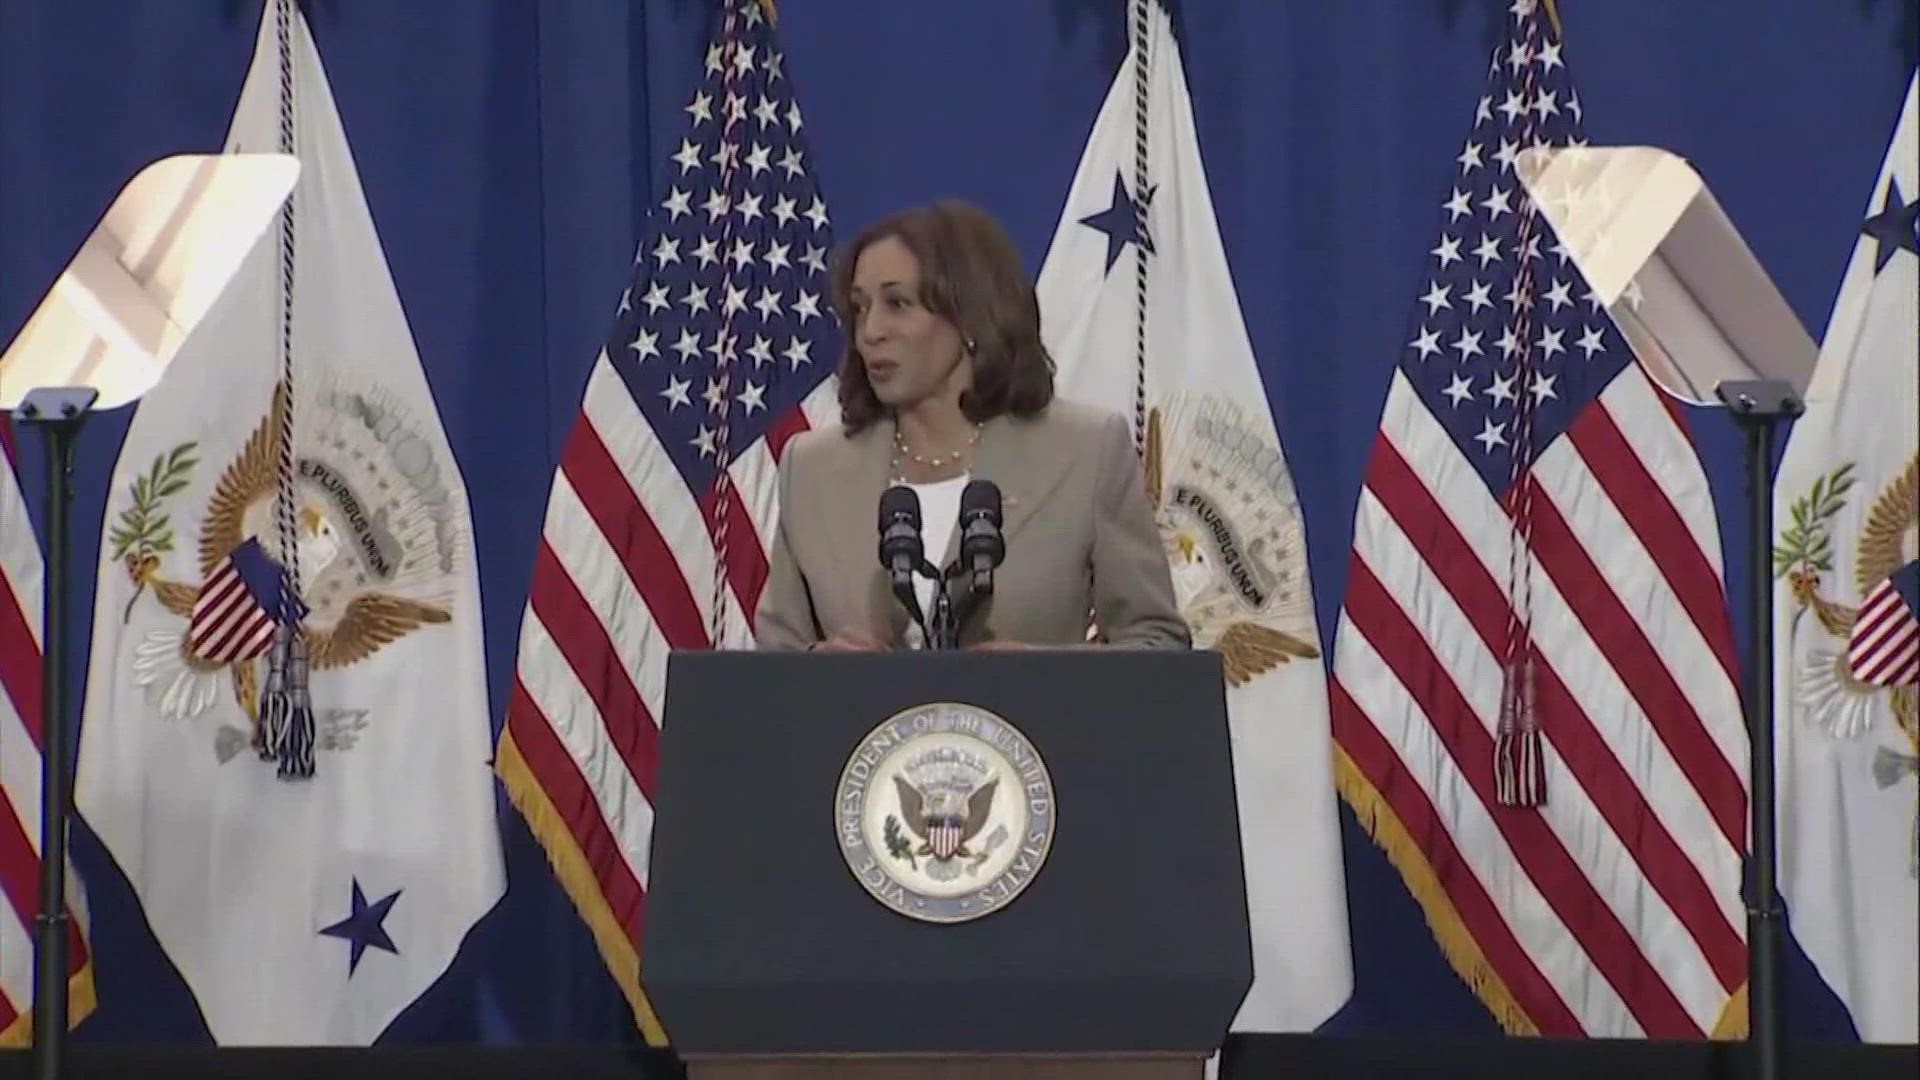 Vice President Kamala Harris is coming to Houston this week to speak at the National Baptist Convention and Johnson Space Center.